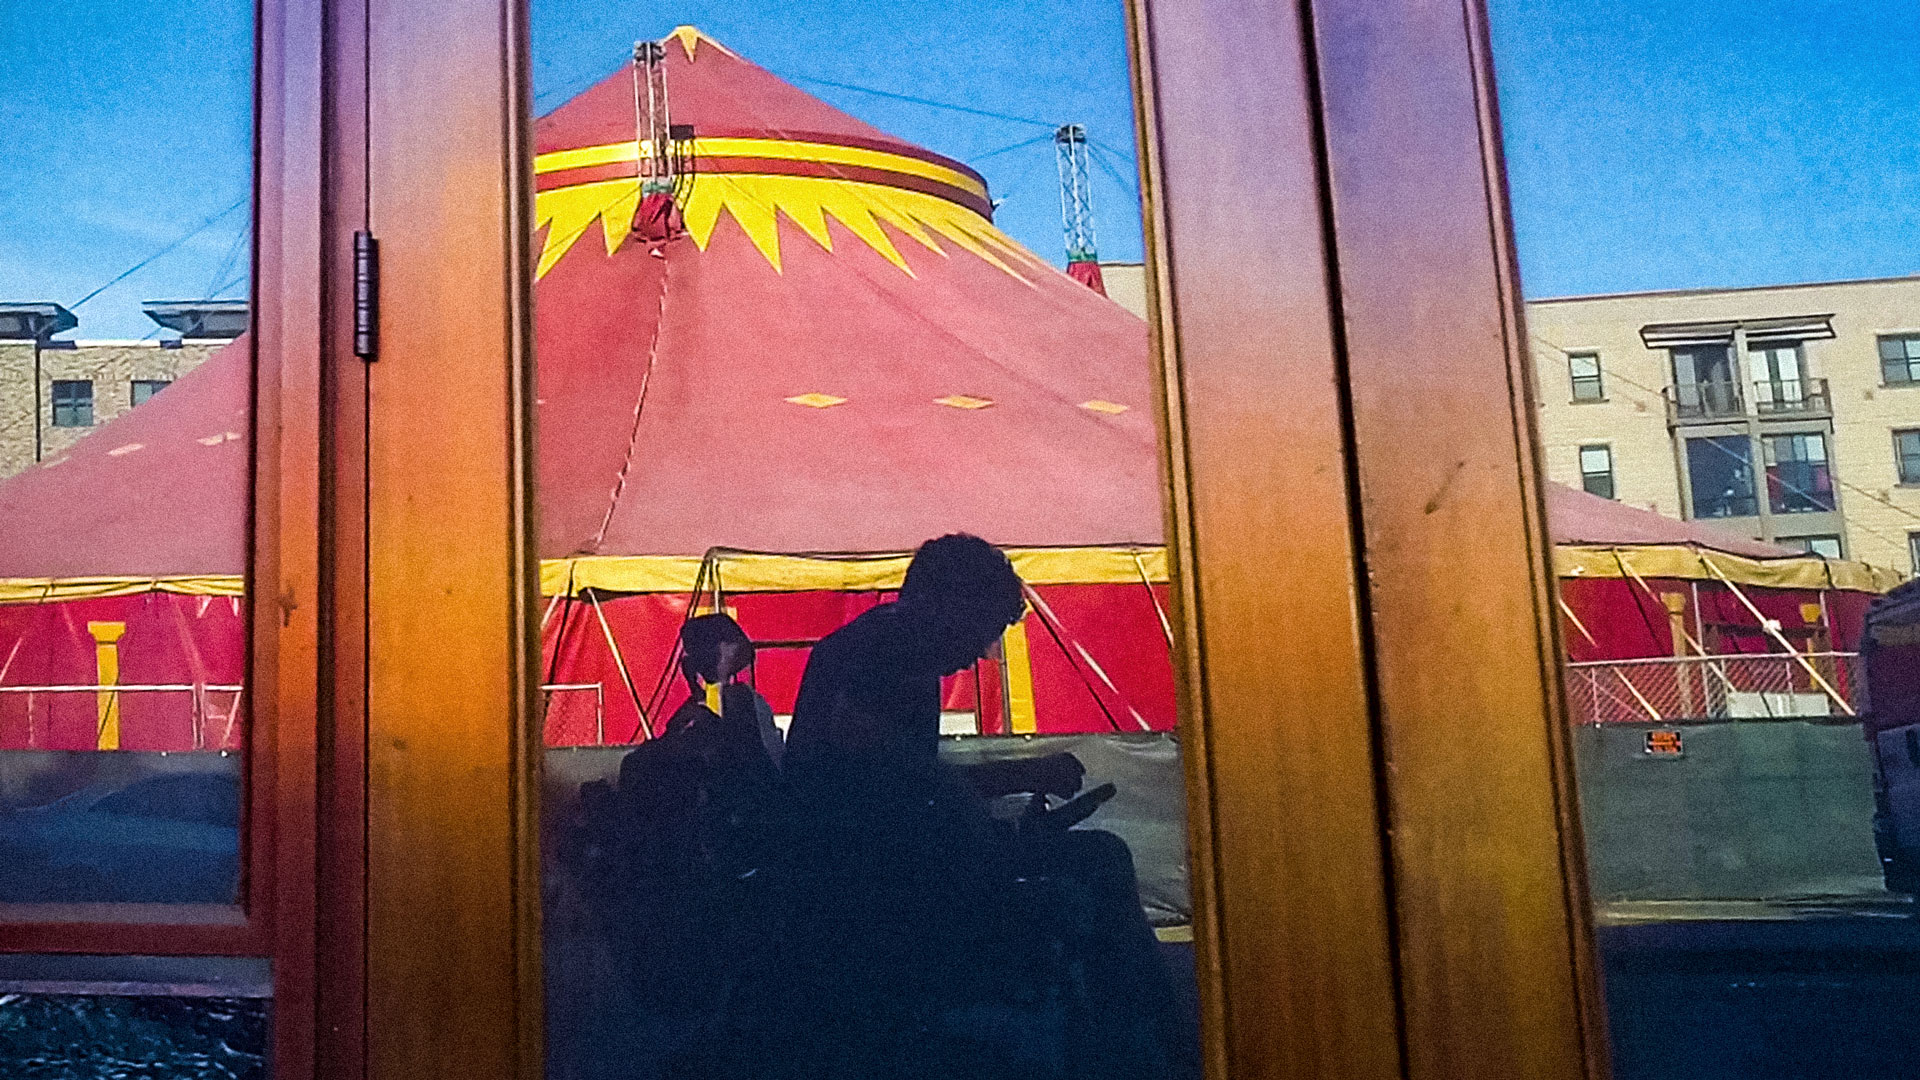 In a reflection of an unmarked storefront is a grayish silhouette of a man using an electric wheelchair. Behind the man is a spectacular red and yellow circus tent. Photo courtesy of Reid Davenport.